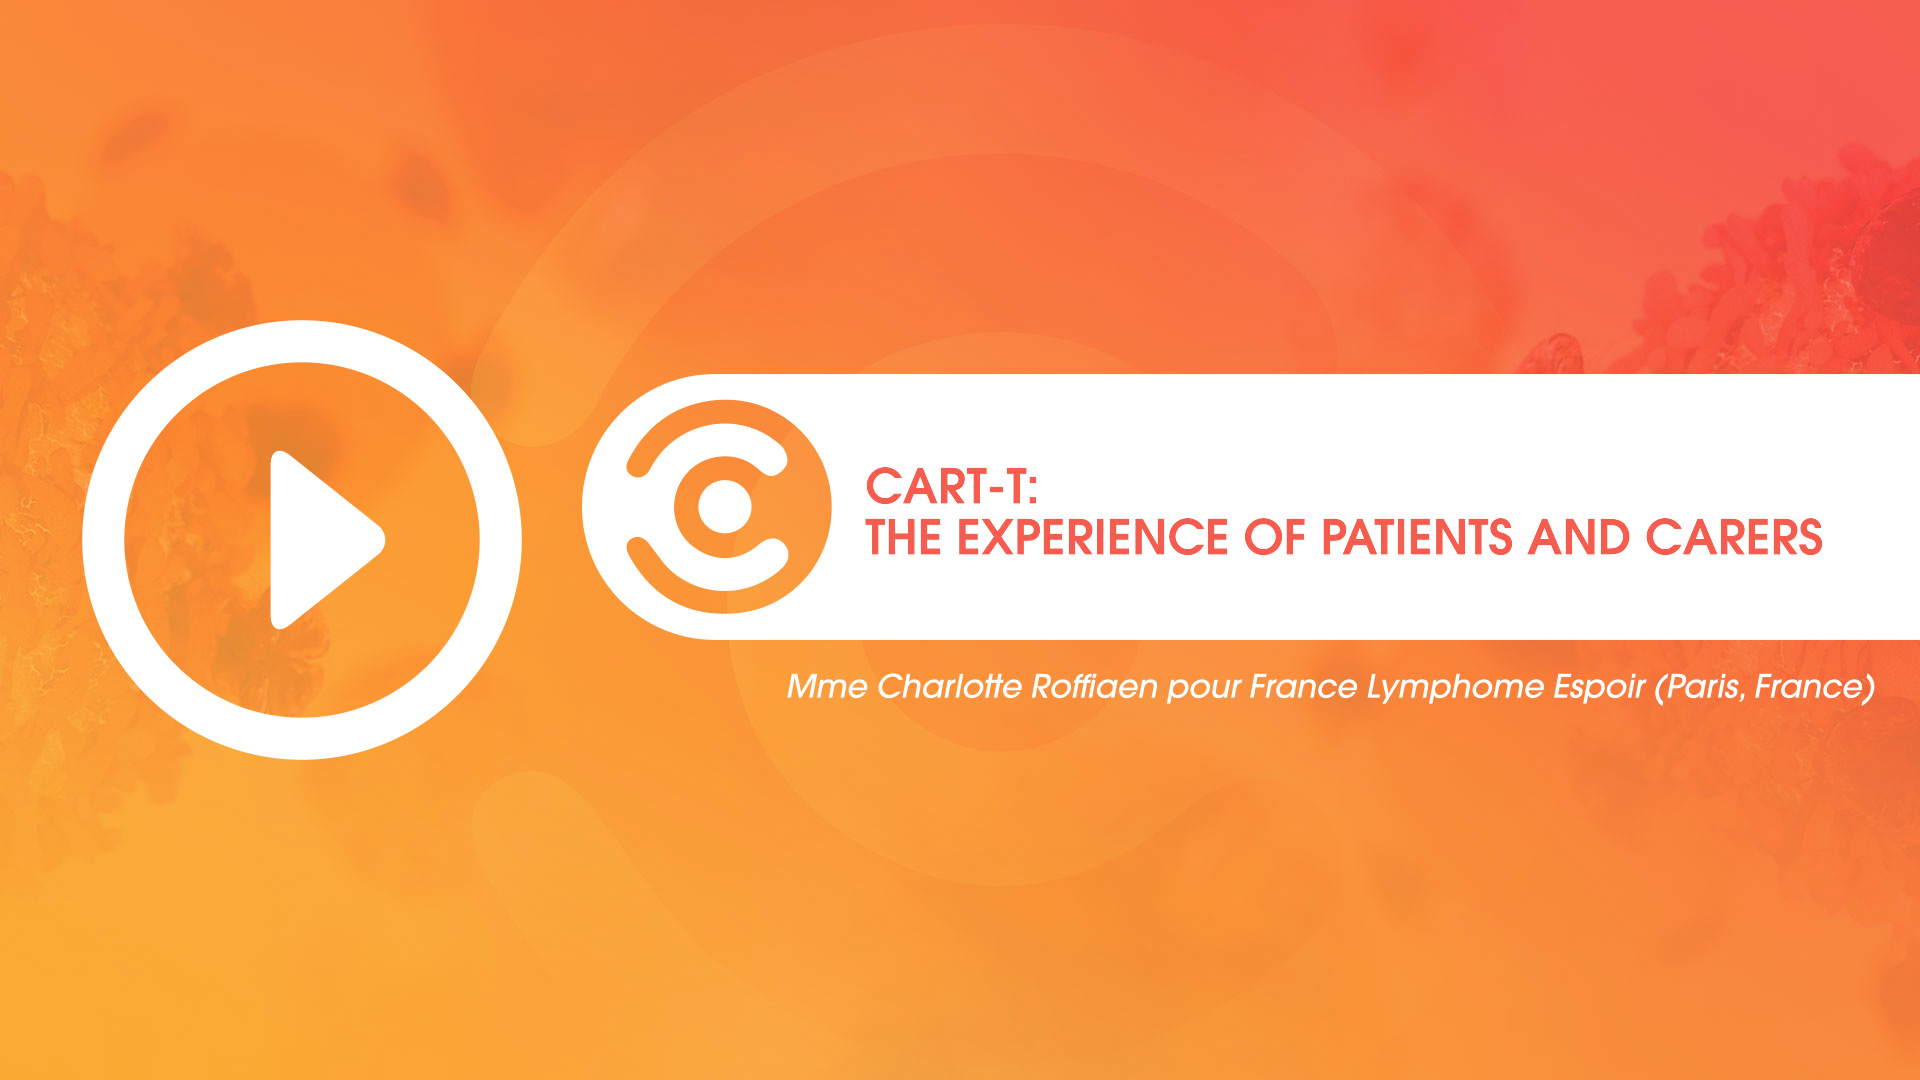 03-COVER_THE_EXPERIENCE_OF_PATIENTS_AND_CARERS